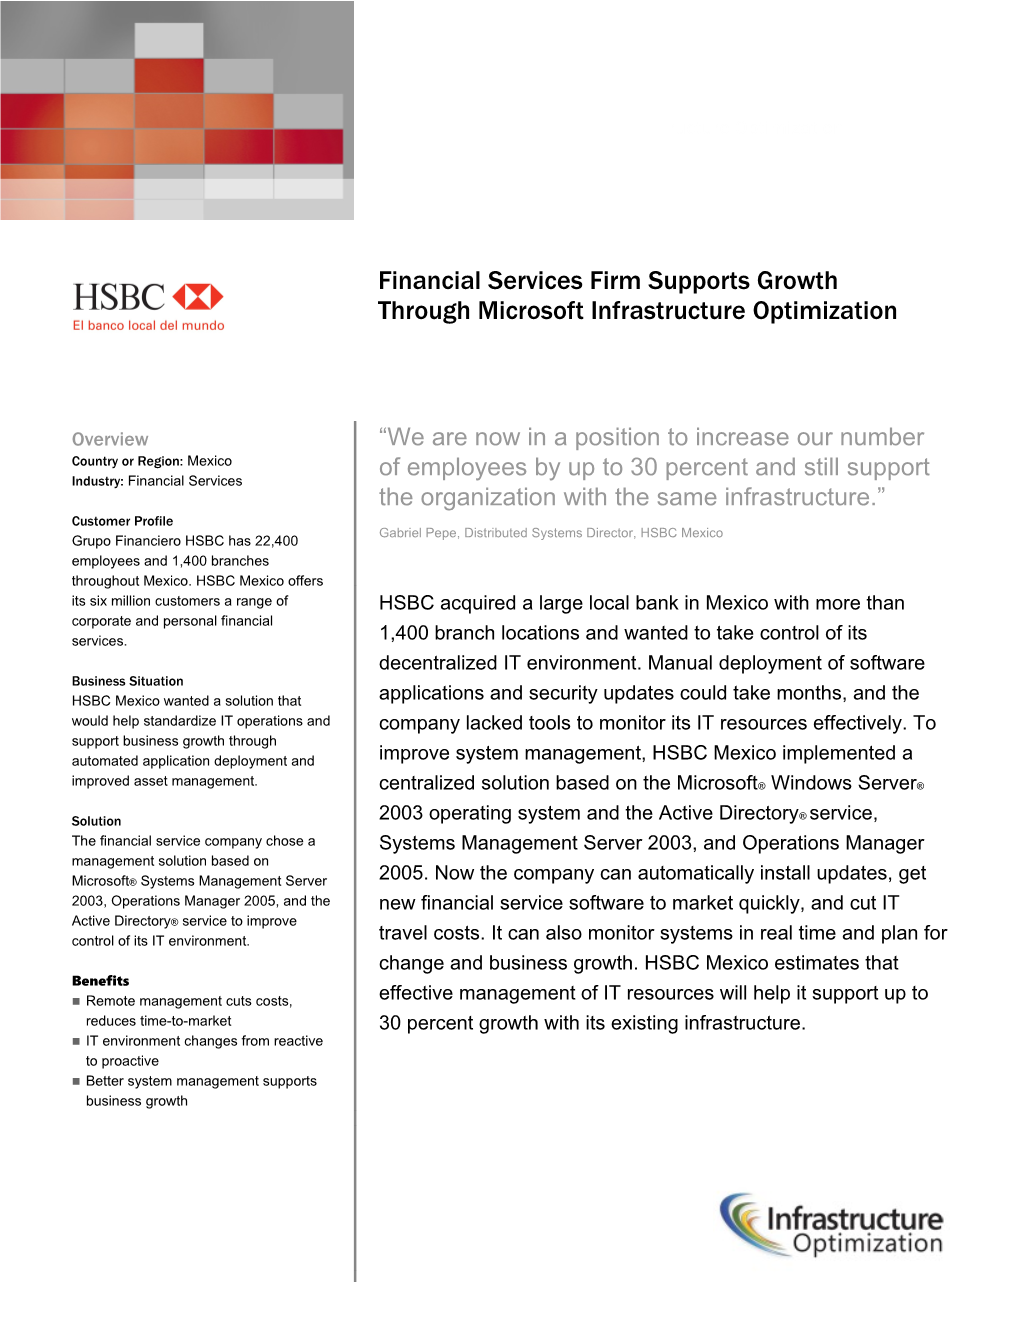 Financial Services Firm Supports Growth Through Microsoft Infrastructure Optimization